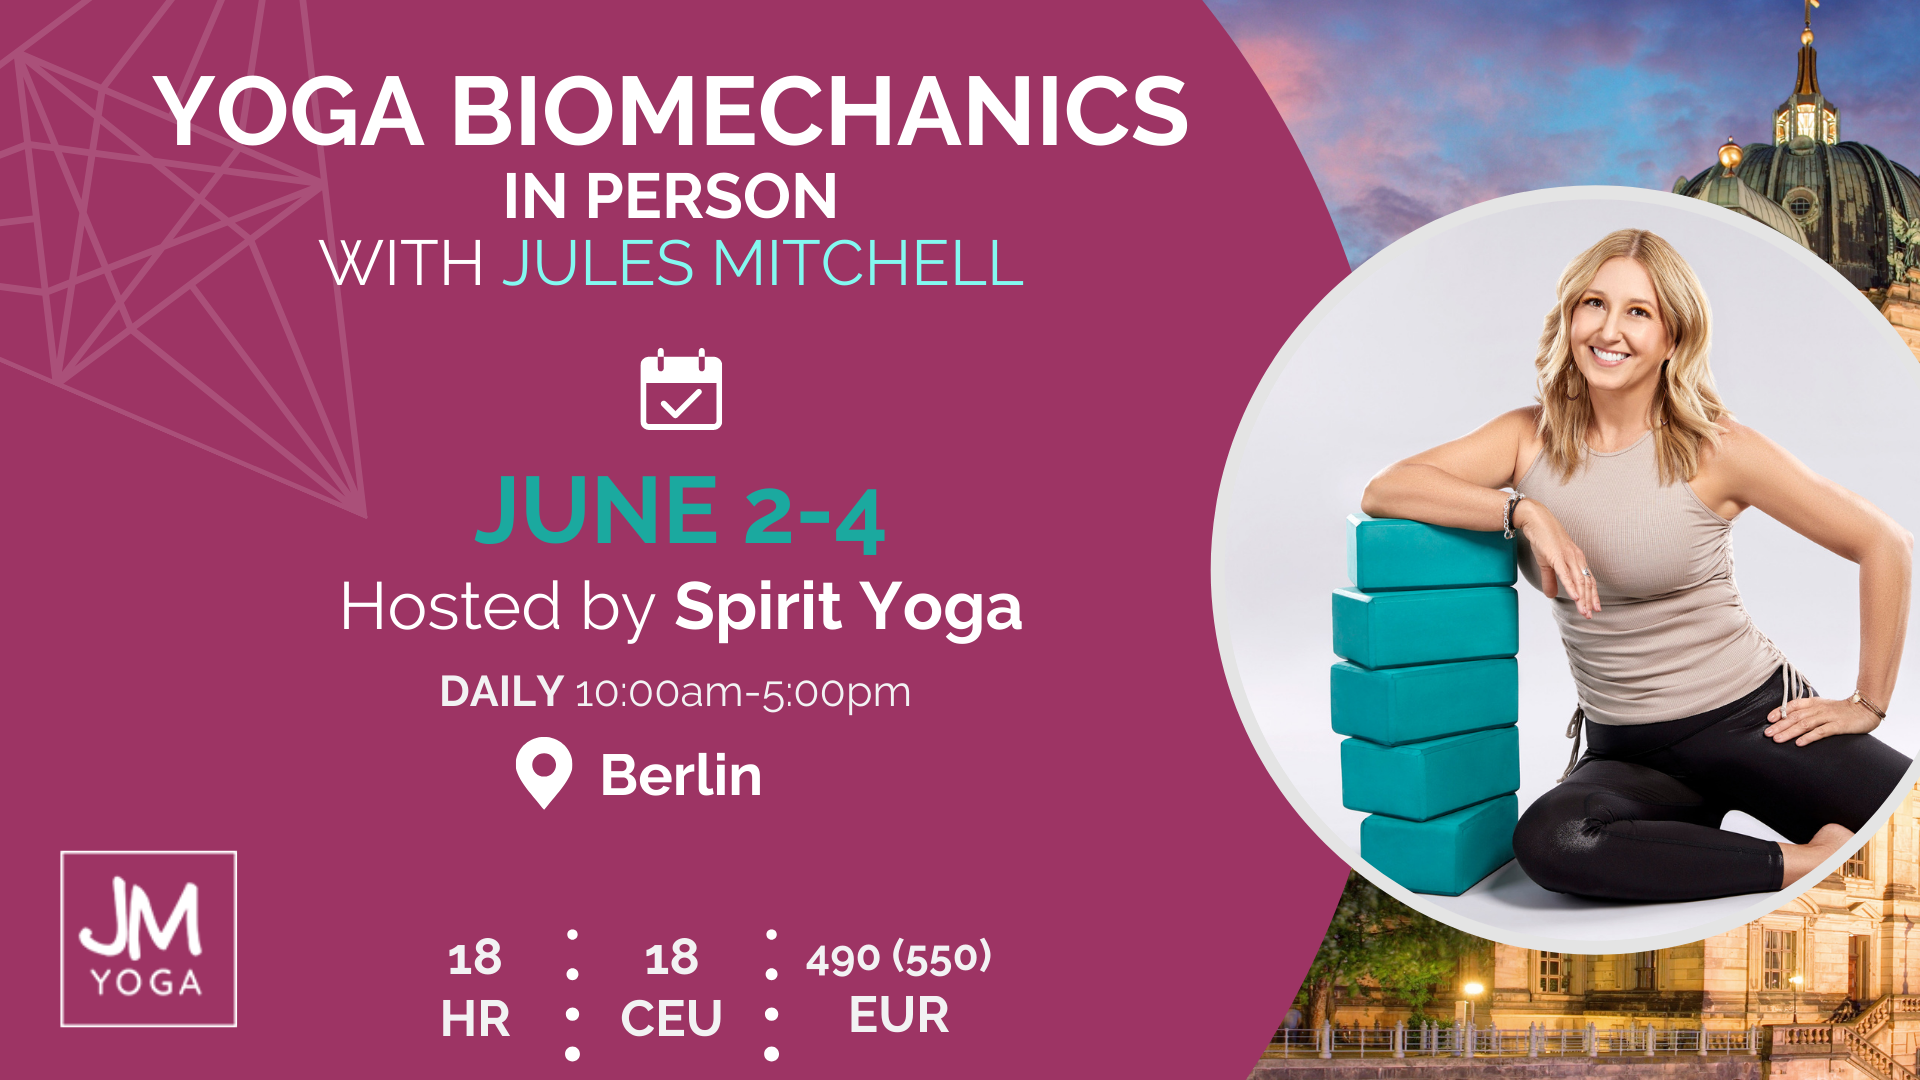 Promotion graphic of Jules Mitchell teaching a yoga workshop in Berlin